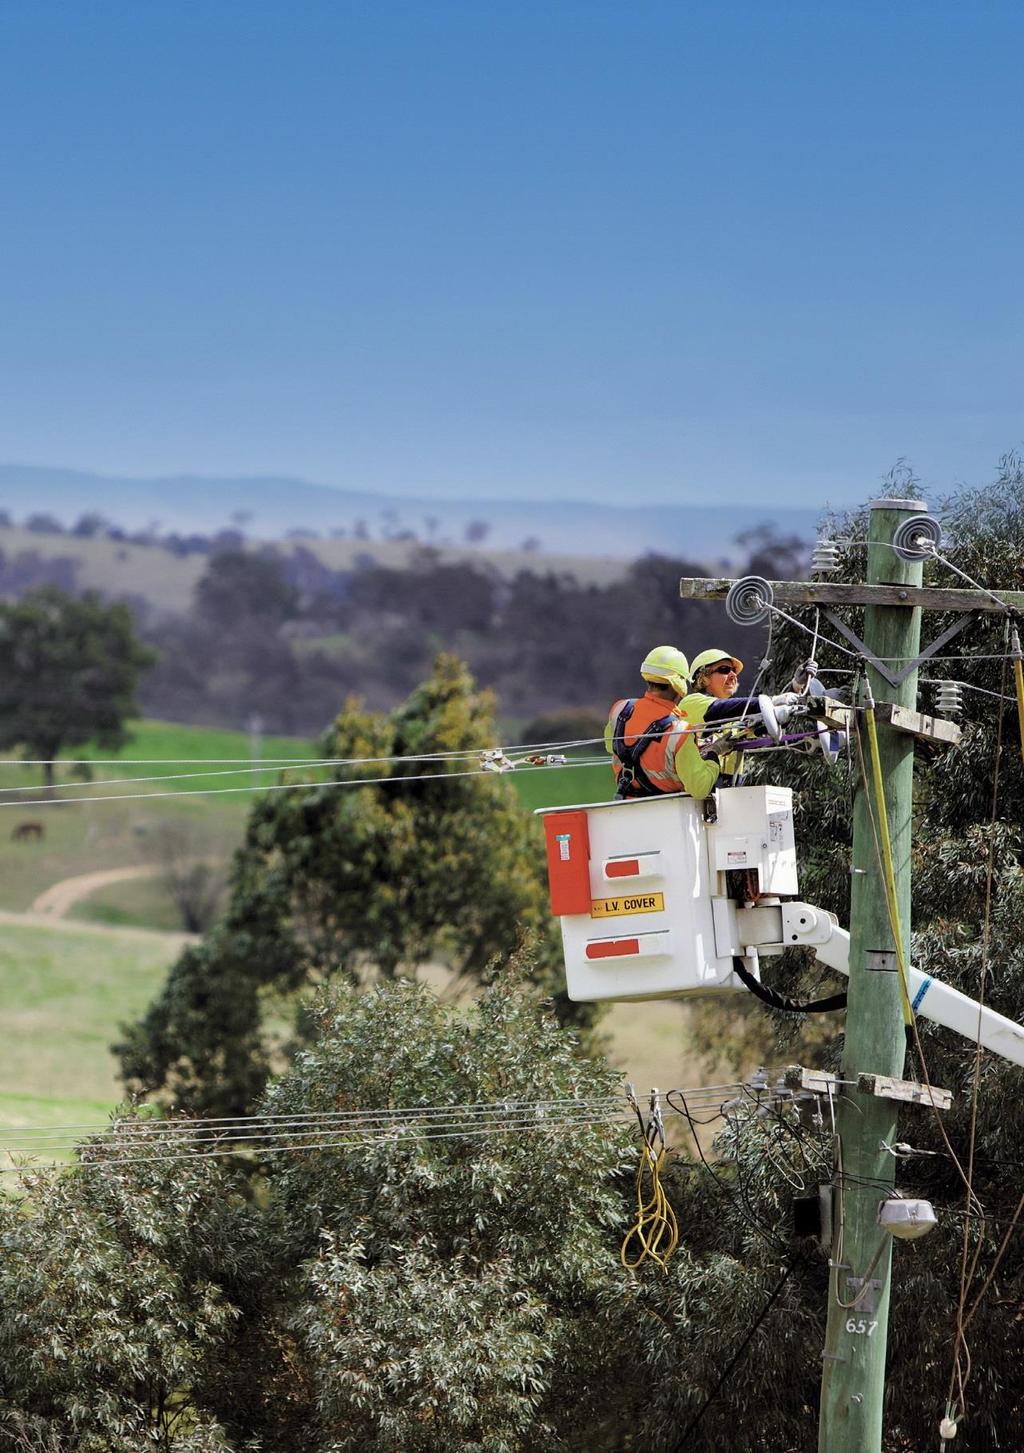 ABOUT US Essential Energy operates and maintains an electricity network that delivers essential network services to homes and businesses across 95 per cent of NSW and parts of Southern Queensland.